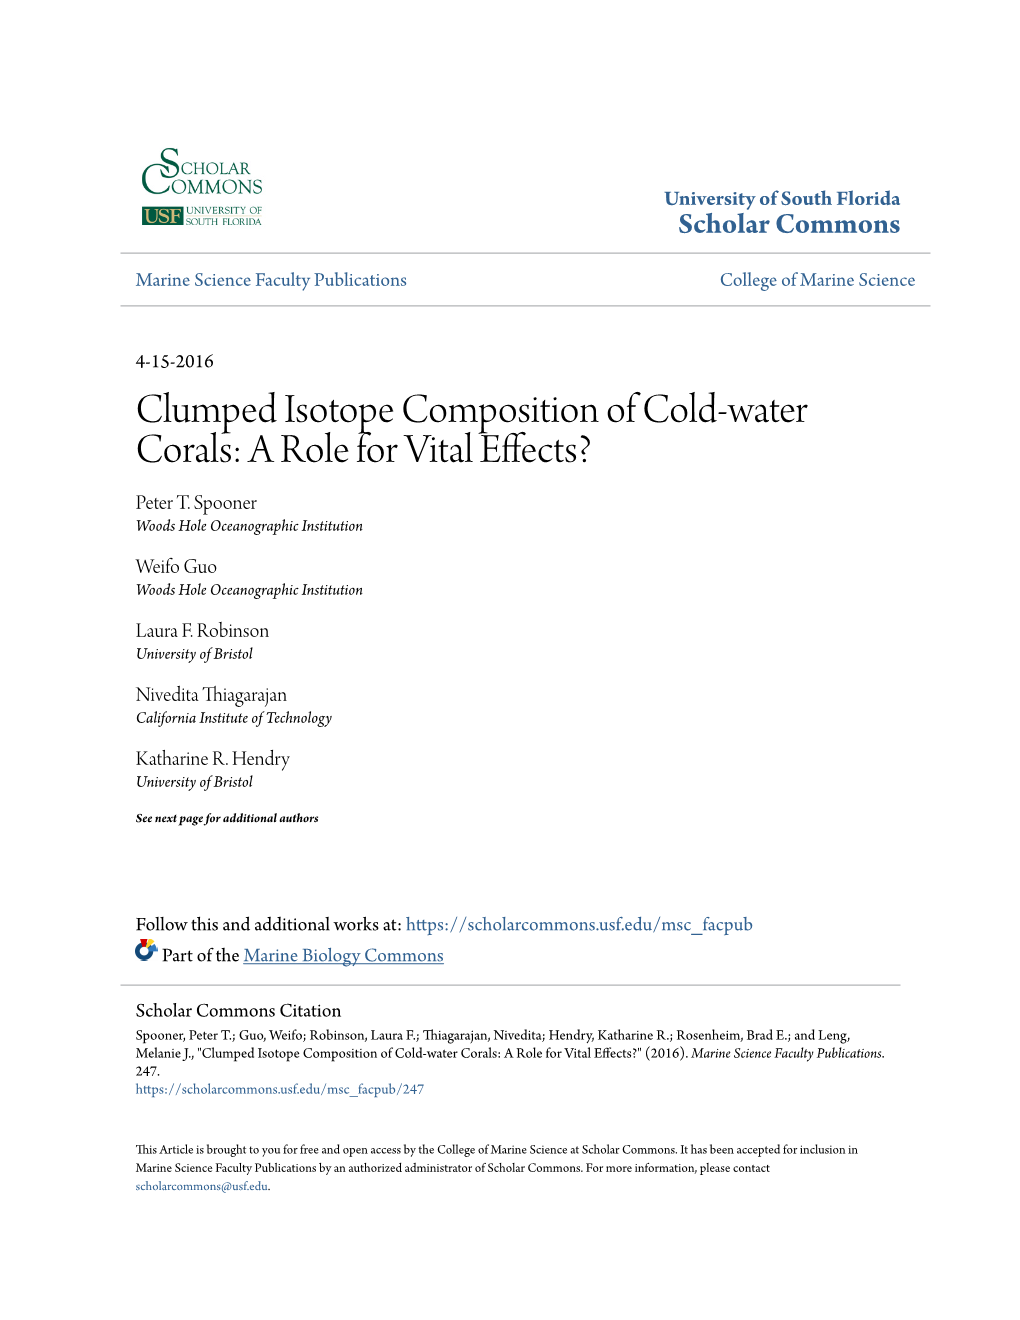 Clumped Isotope Composition of Cold-Water Corals: a Role for Vital Effects? Peter T